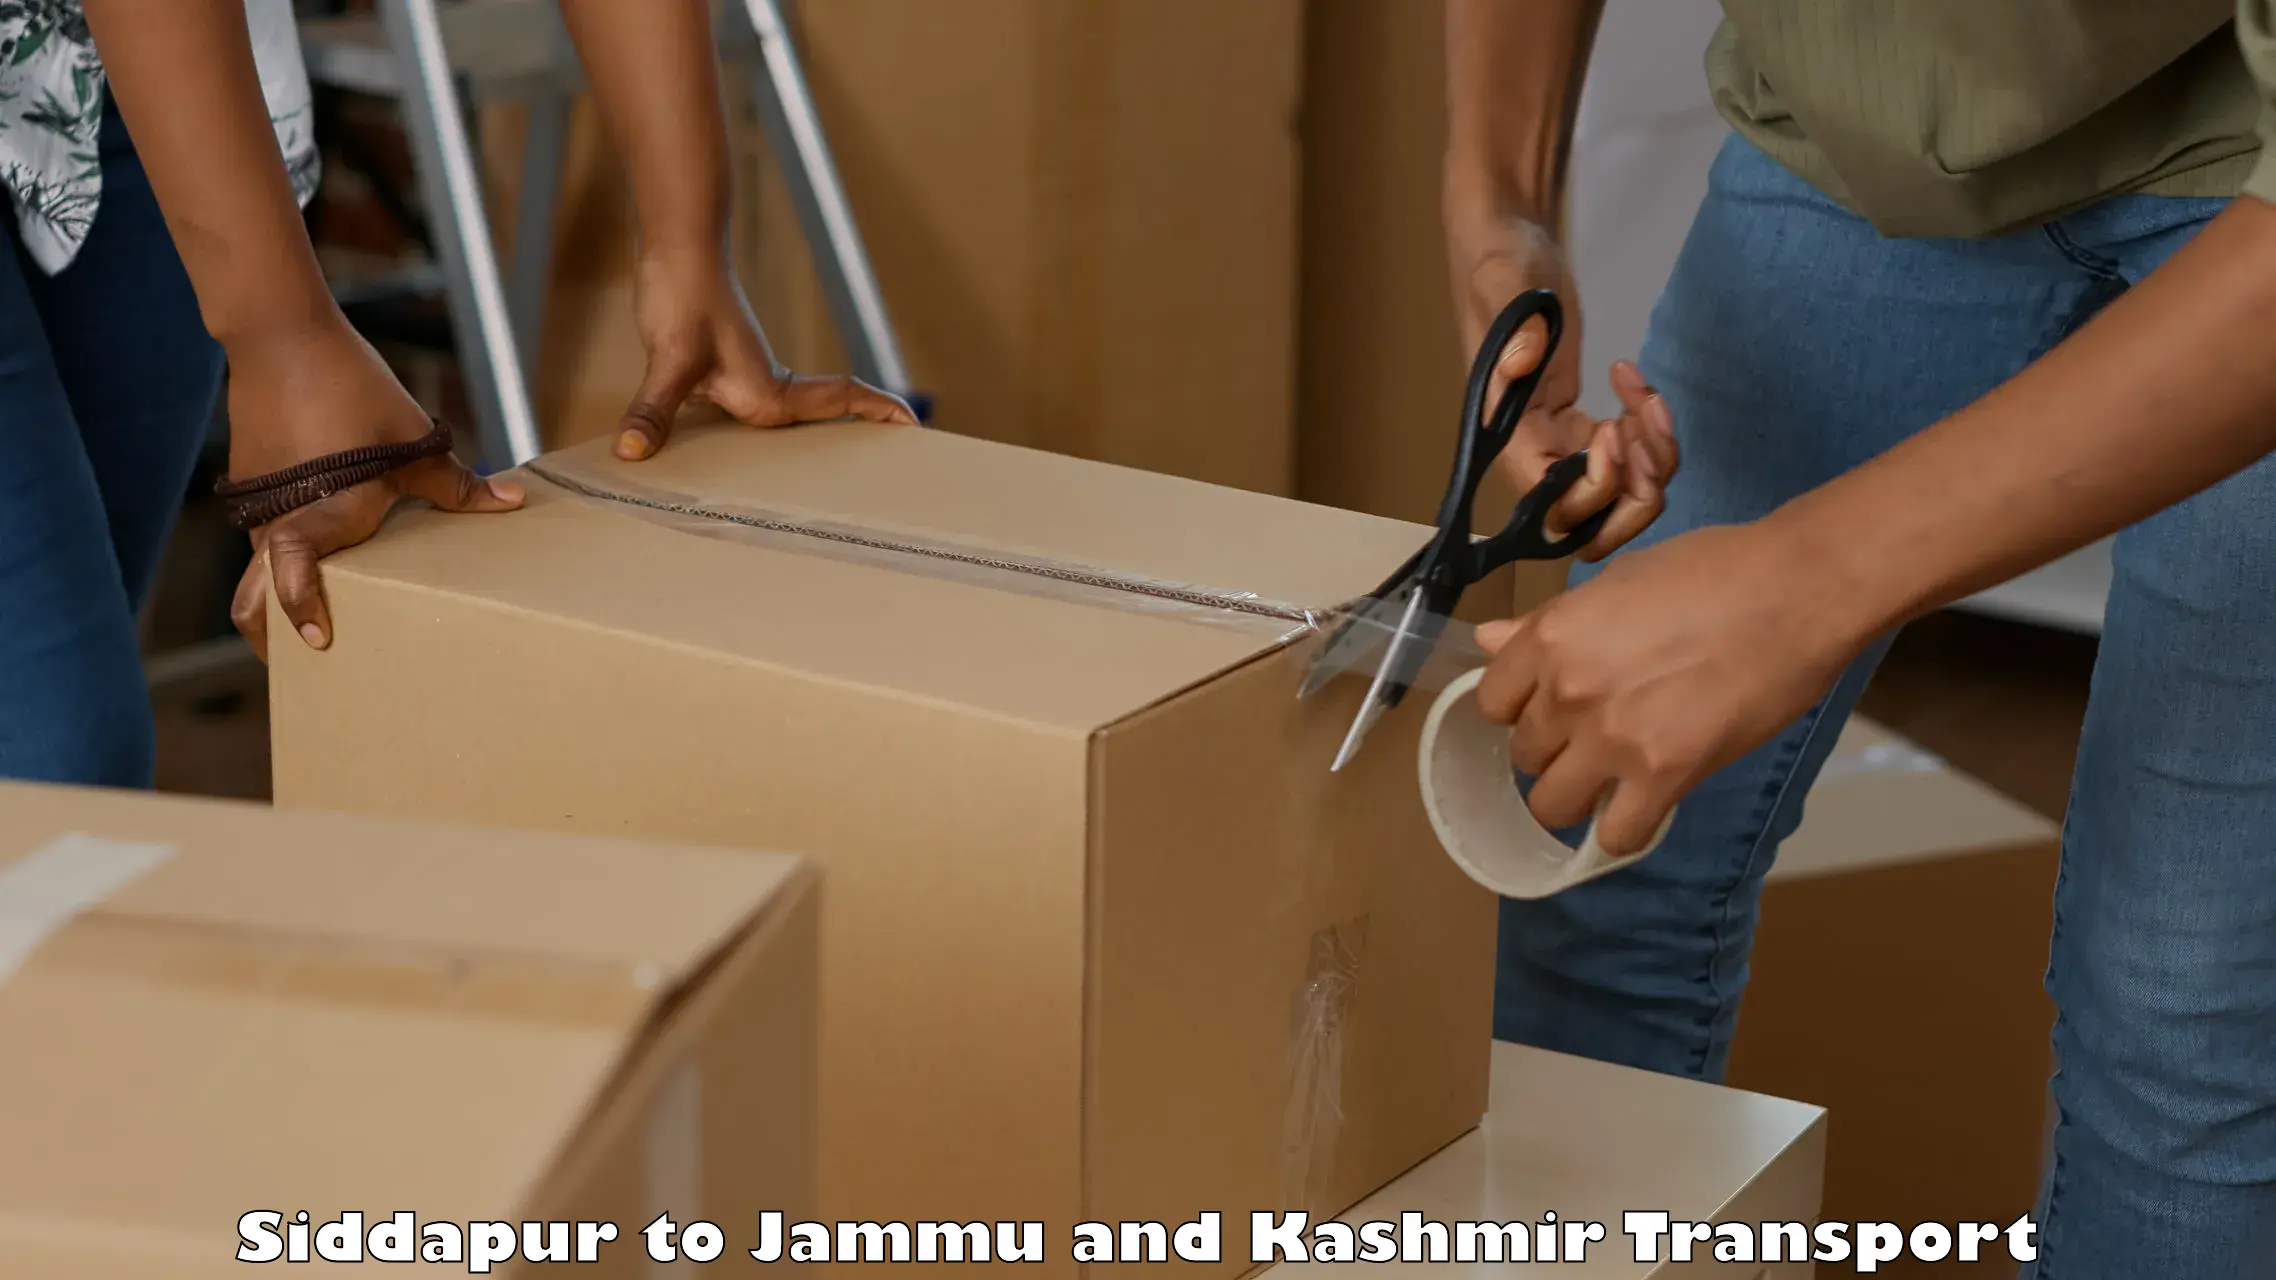 Container transport service Siddapur to Udhampur